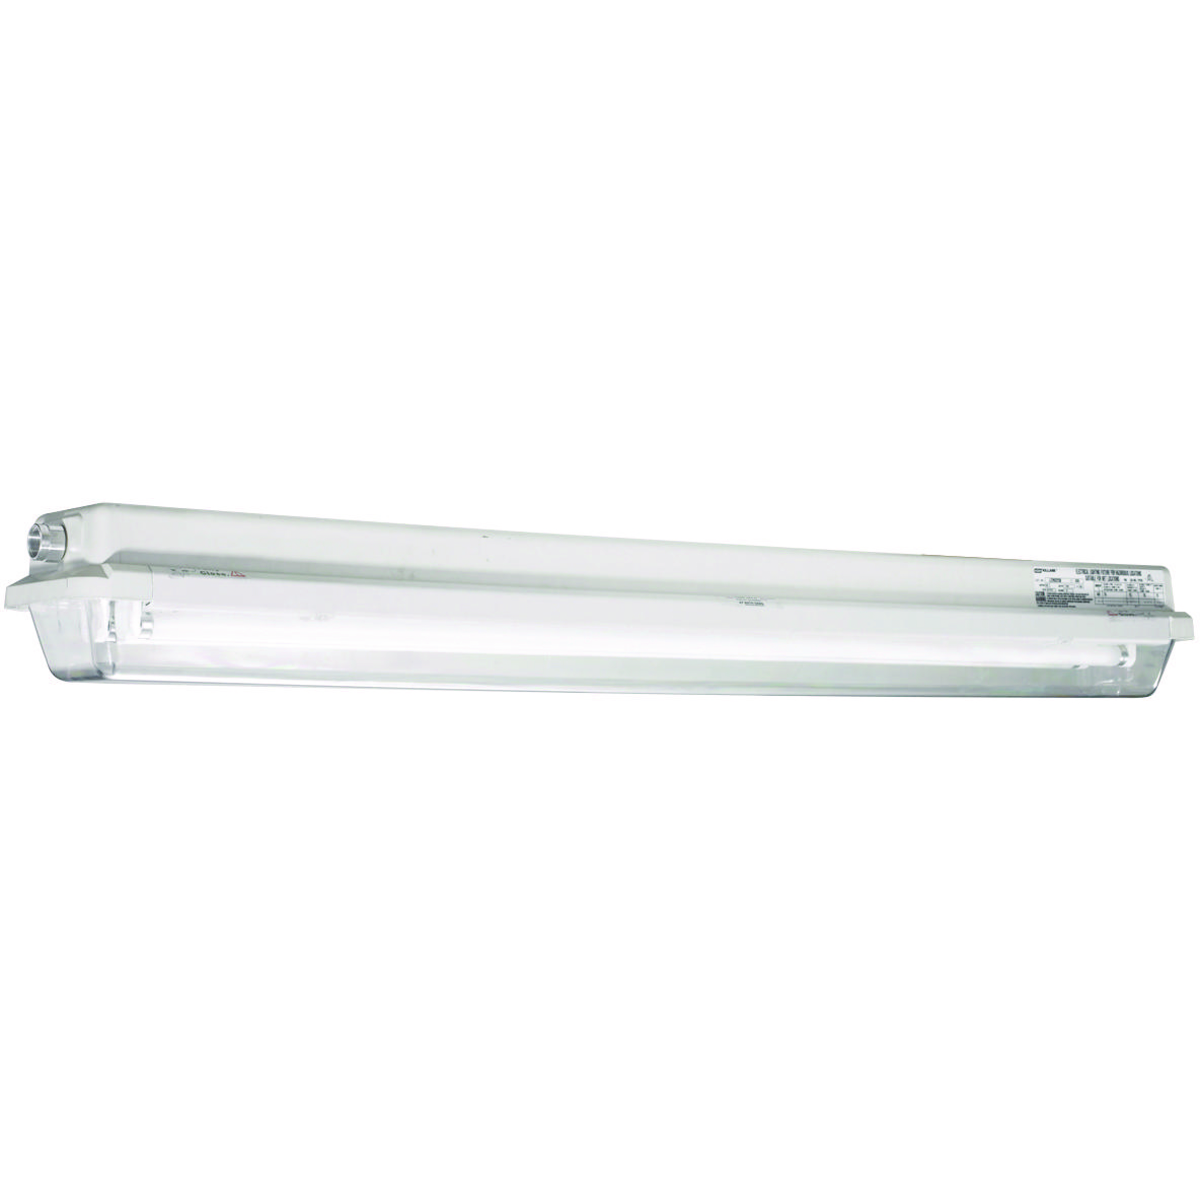 LZ2NE1 SERIES - NON-METALLIC 32 WATT FLUORESCENT EMERGENCY POWER LIGHTFIXTURE (TWO 4-FOOT LAMPS NOT INCLUDED) - DOUBLE-ENDED LAMP TYPE -120-277V AT 60HZ - HUB SIZE 3/4 INCH NPT